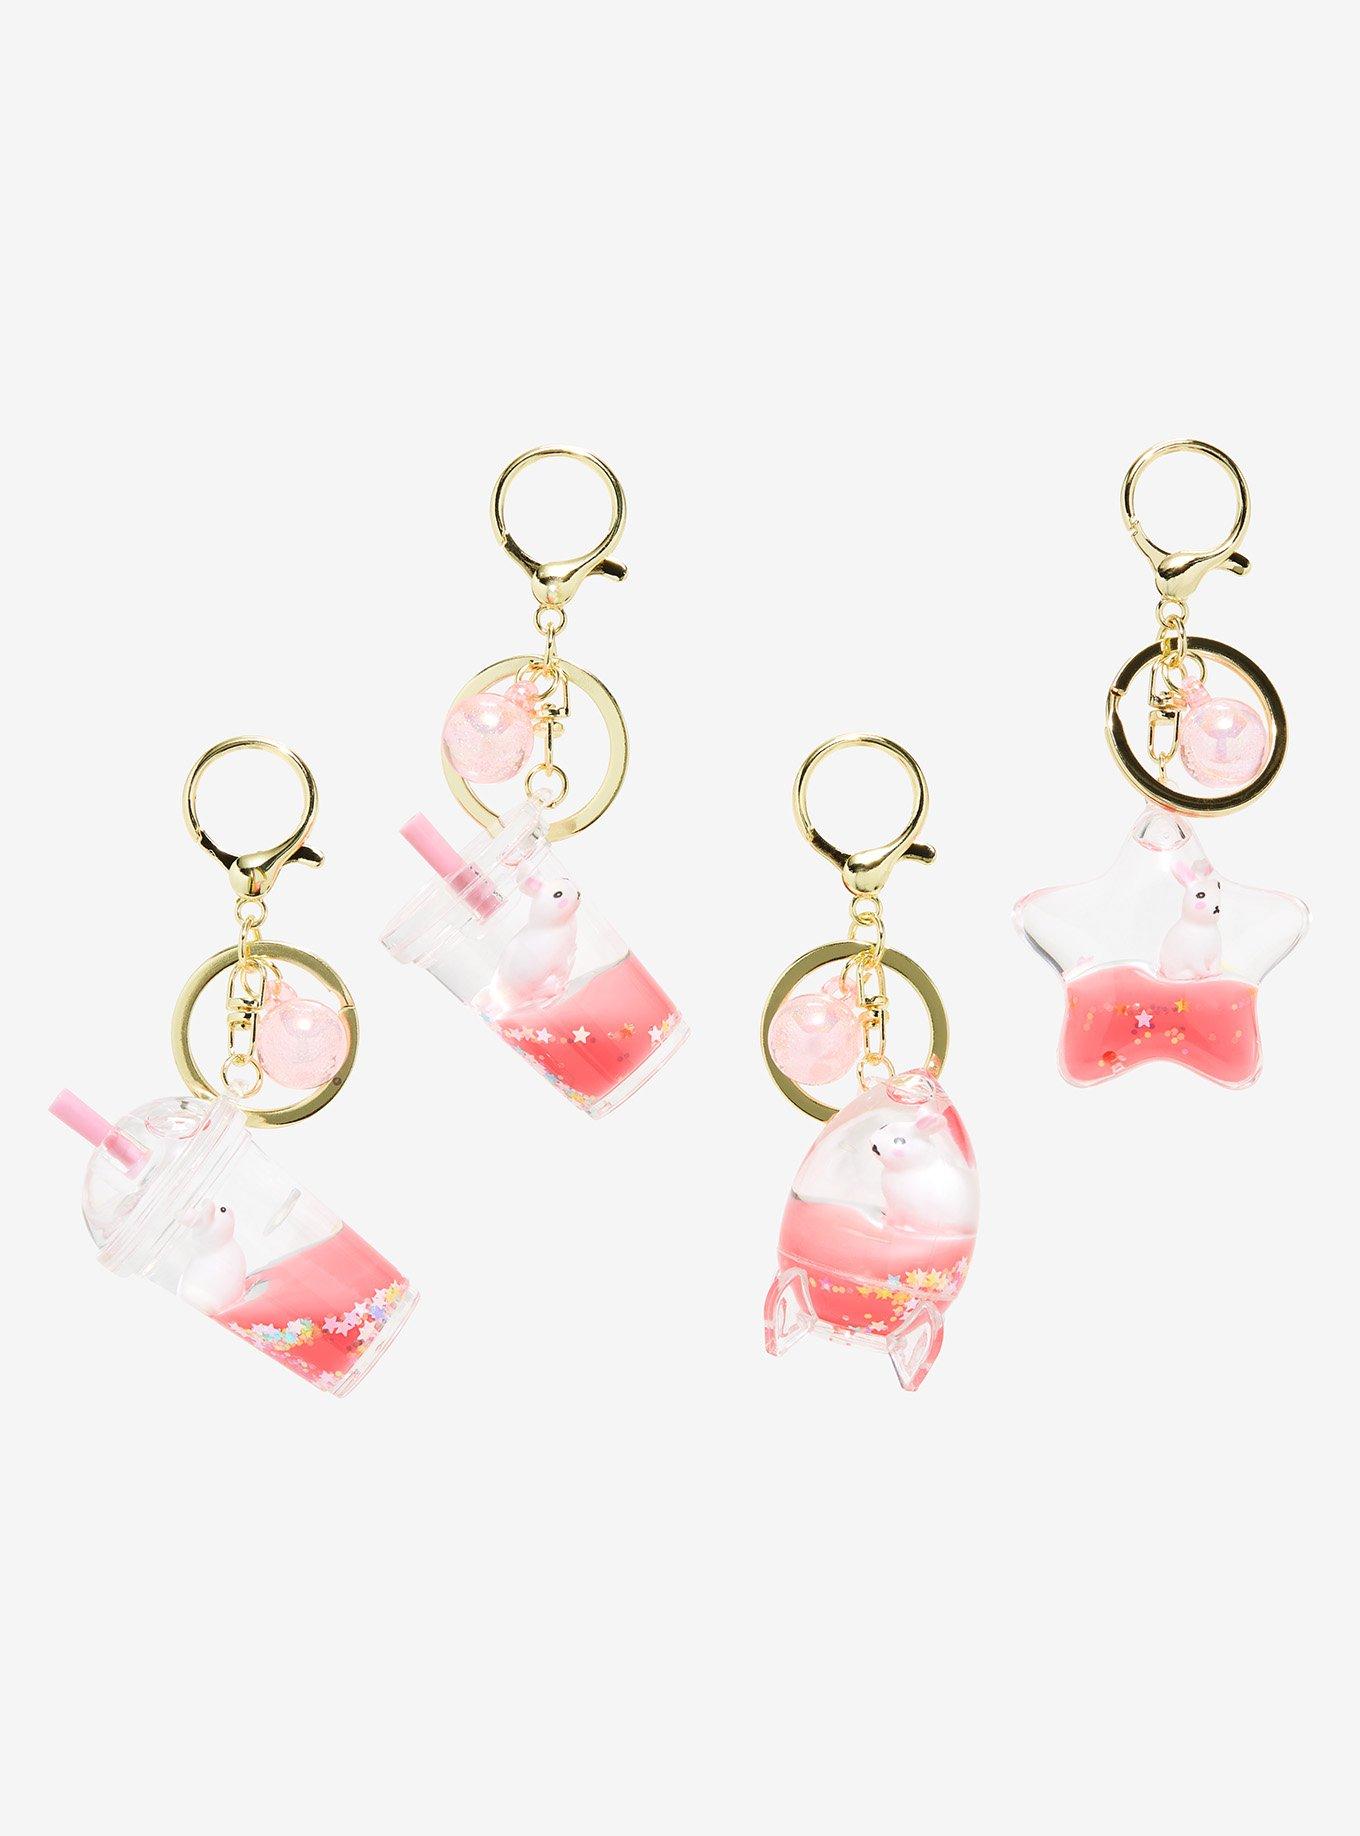 Keychain packaging ✨ I quickly show you how I recieve my